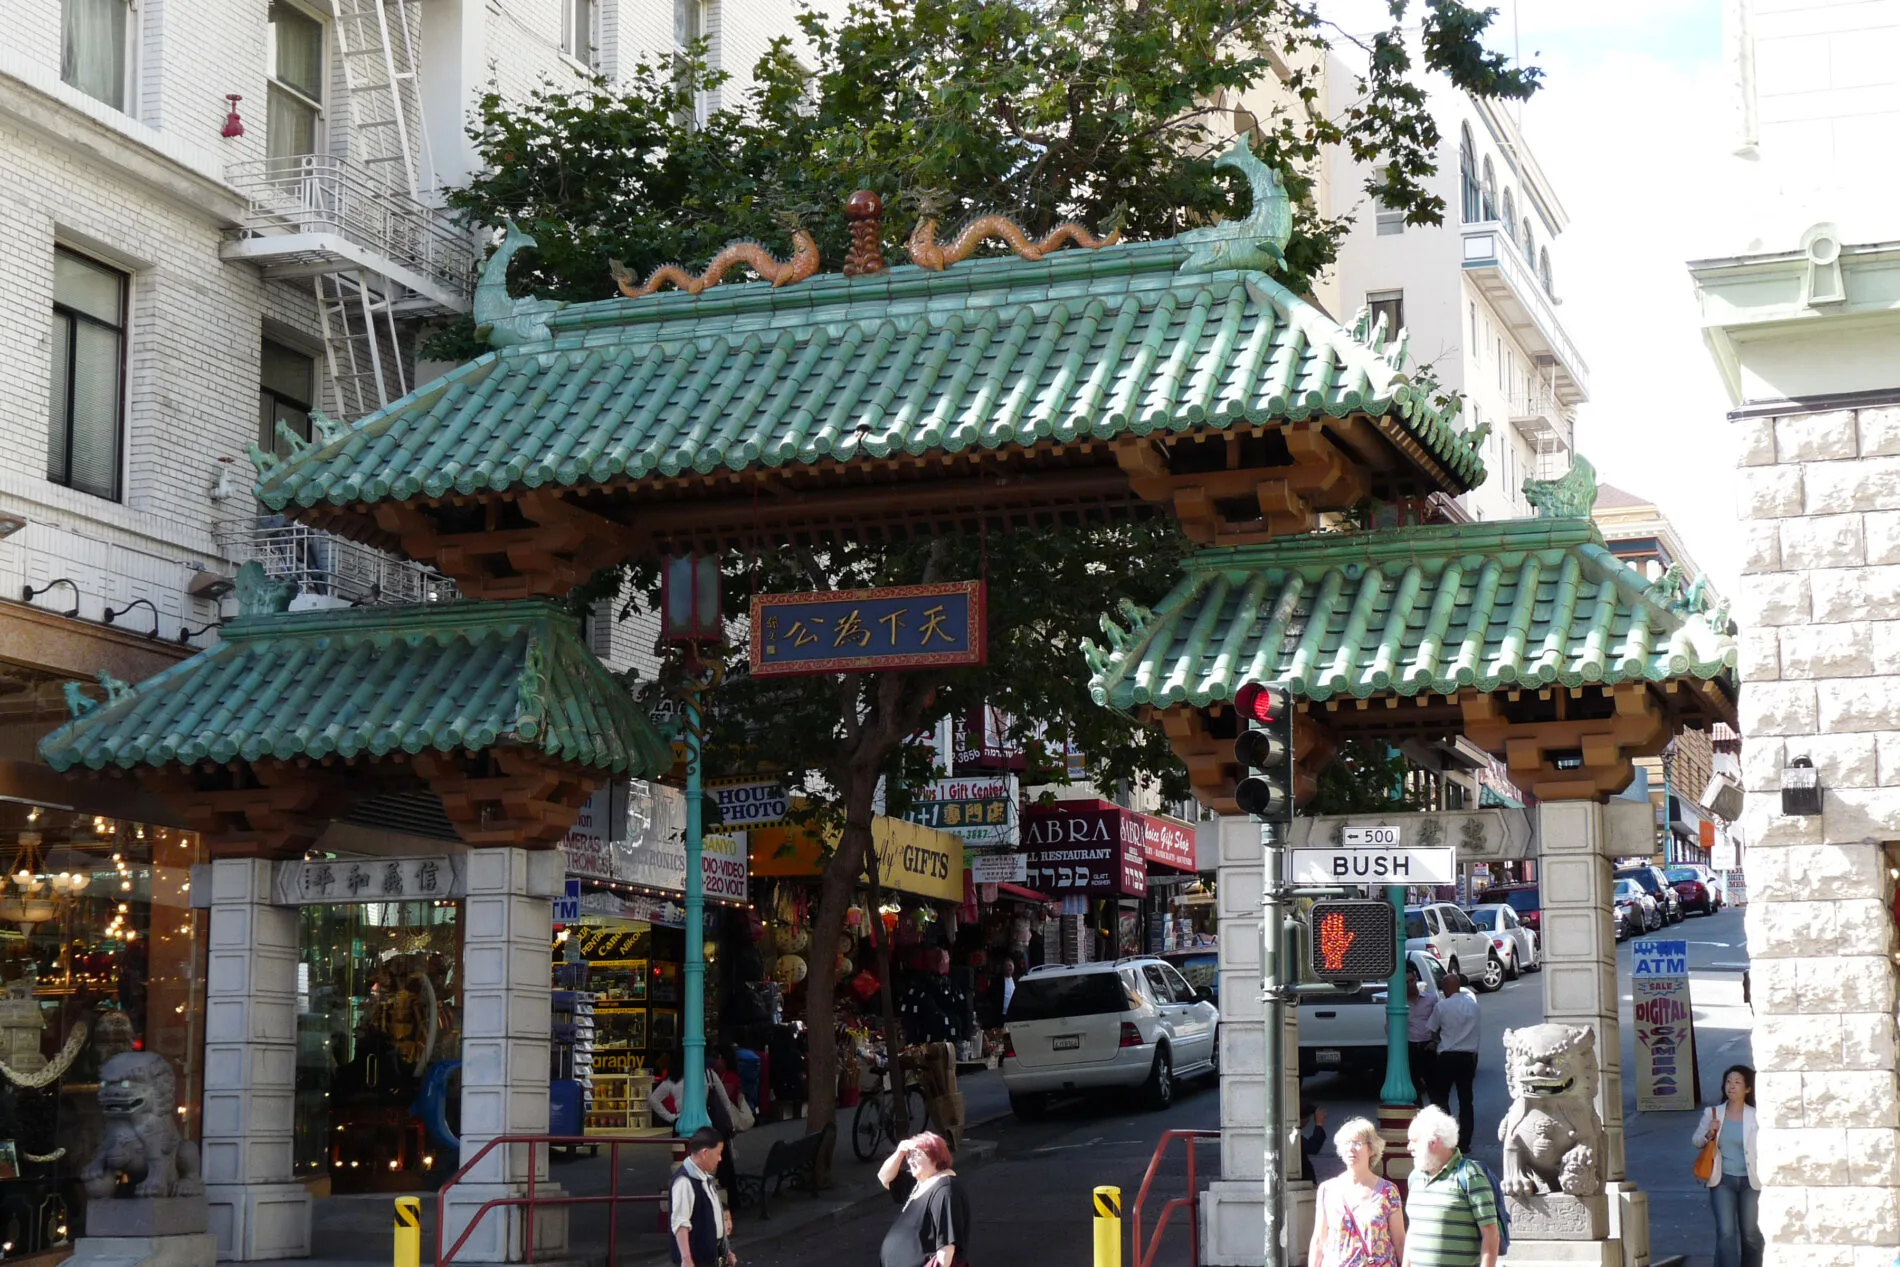 Ornate Dragon Gate, with gold dragons on its green-tiled roof. It’s the main entrance to Chinatown, San Francisco.